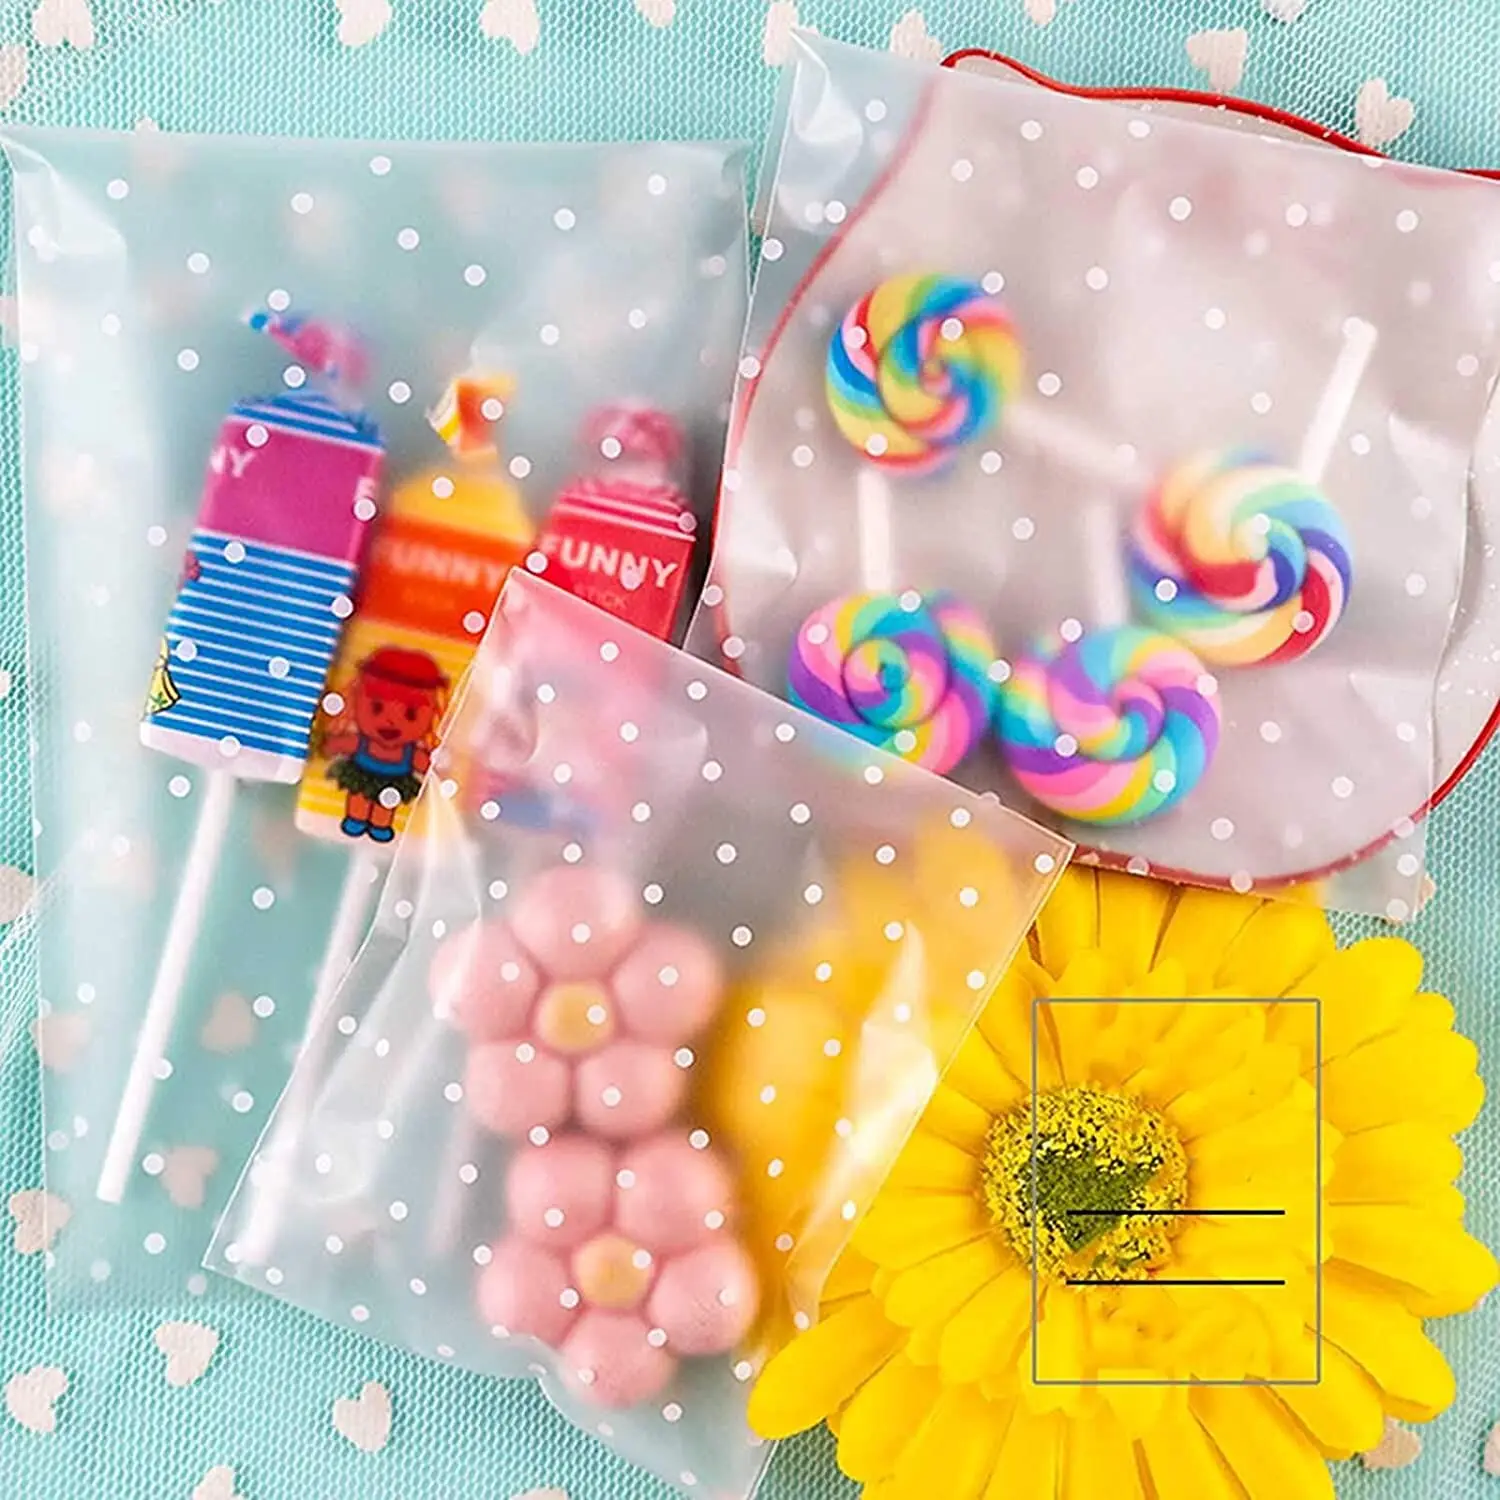 

100pcs Self Adhesive Cookie Bags Cellophane Treat Bags White Dot OPP Plastic Pastry Bags Party Bag for Bakery Candy, Soap, Cooki